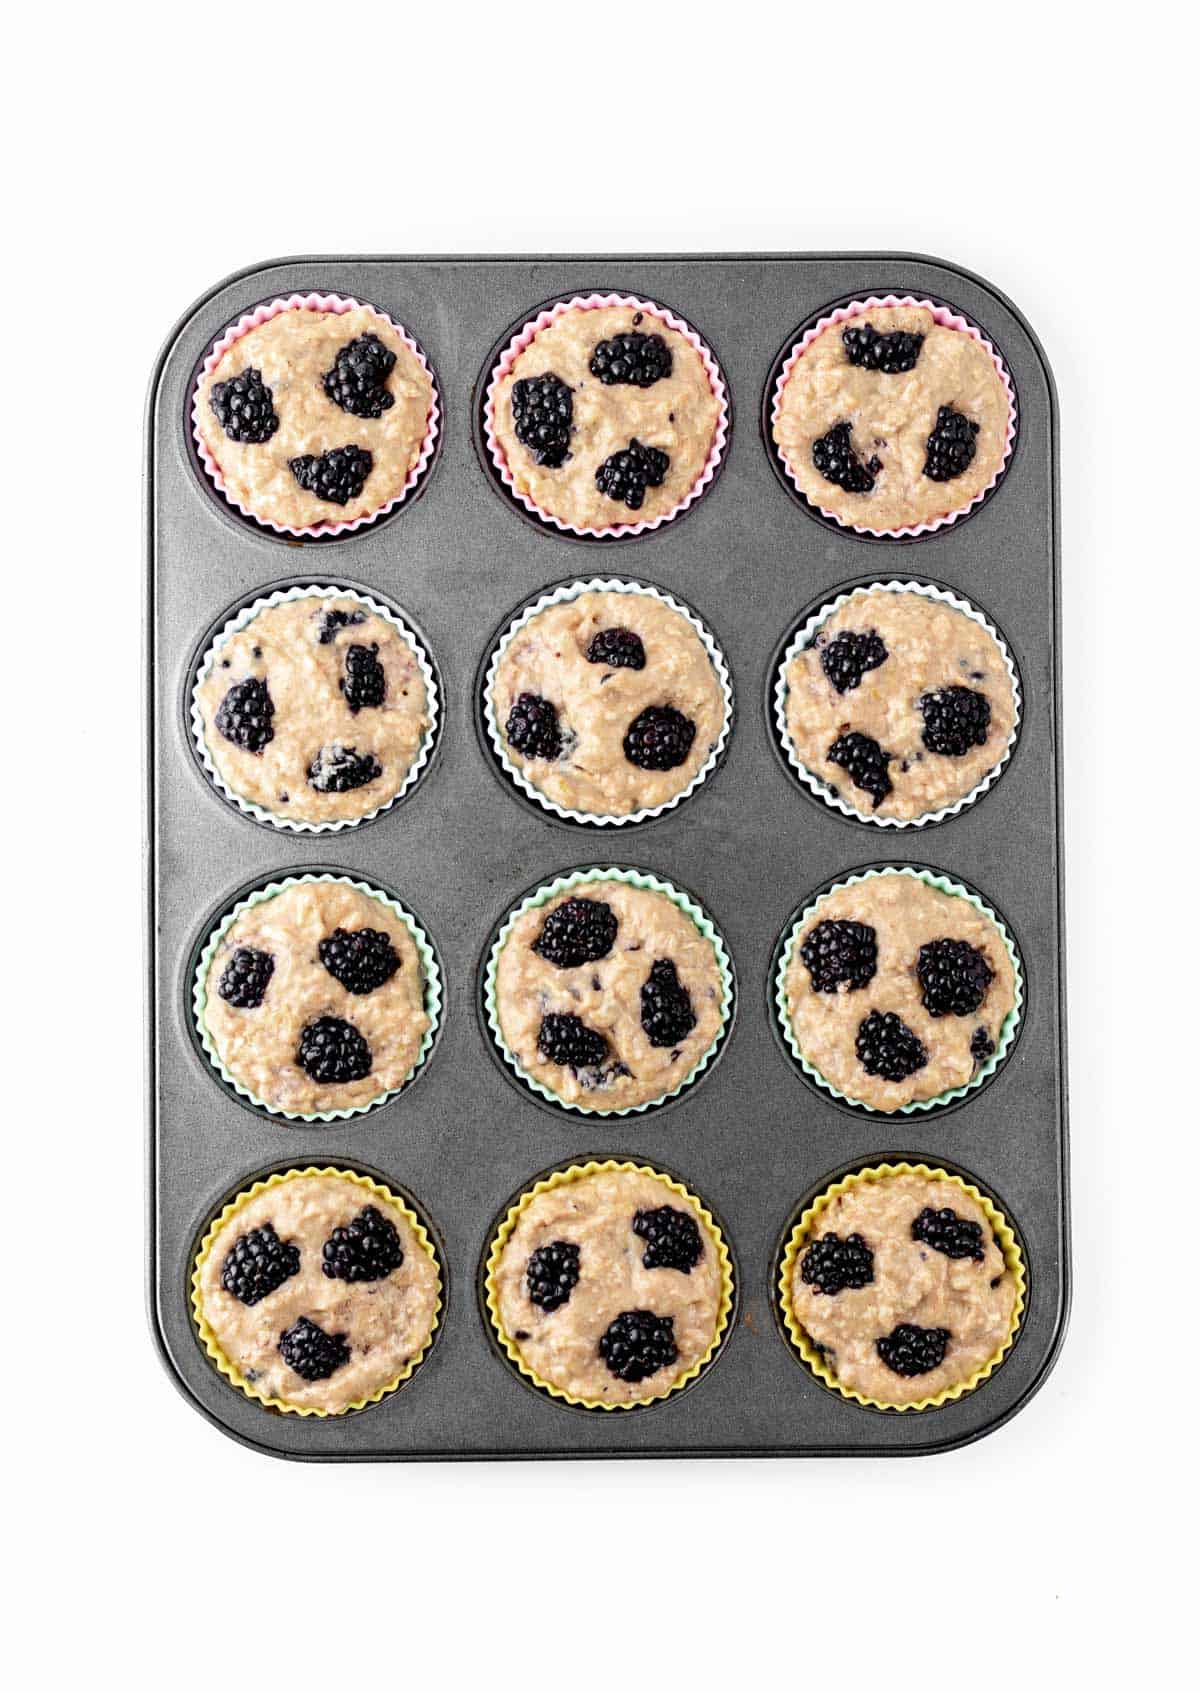 The banana blackberry oatmeal muffin batter poured into a muffin tin prior to baking.